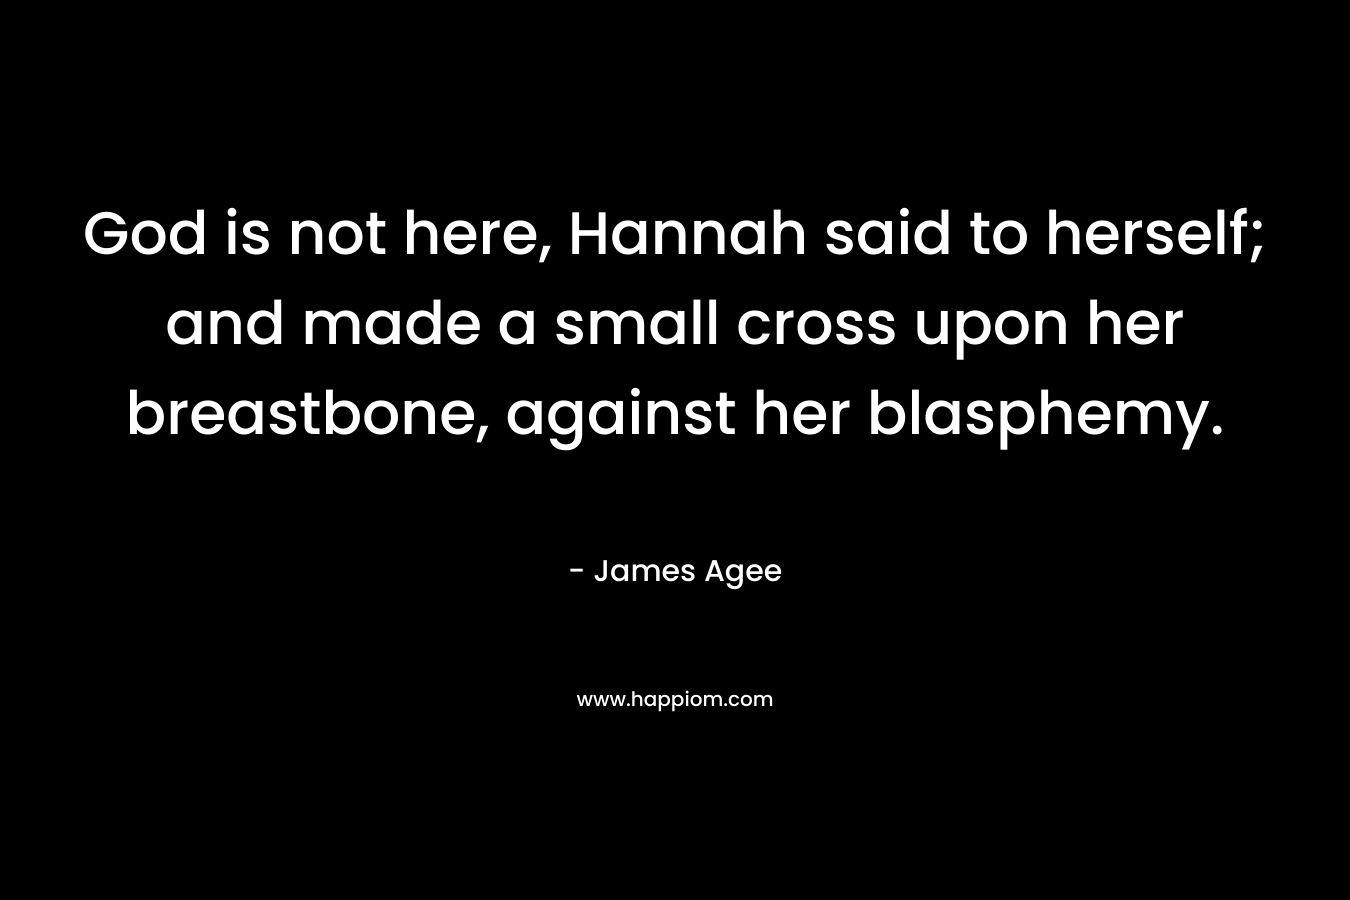 God is not here, Hannah said to herself; and made a small cross upon her breastbone, against her blasphemy. – James Agee